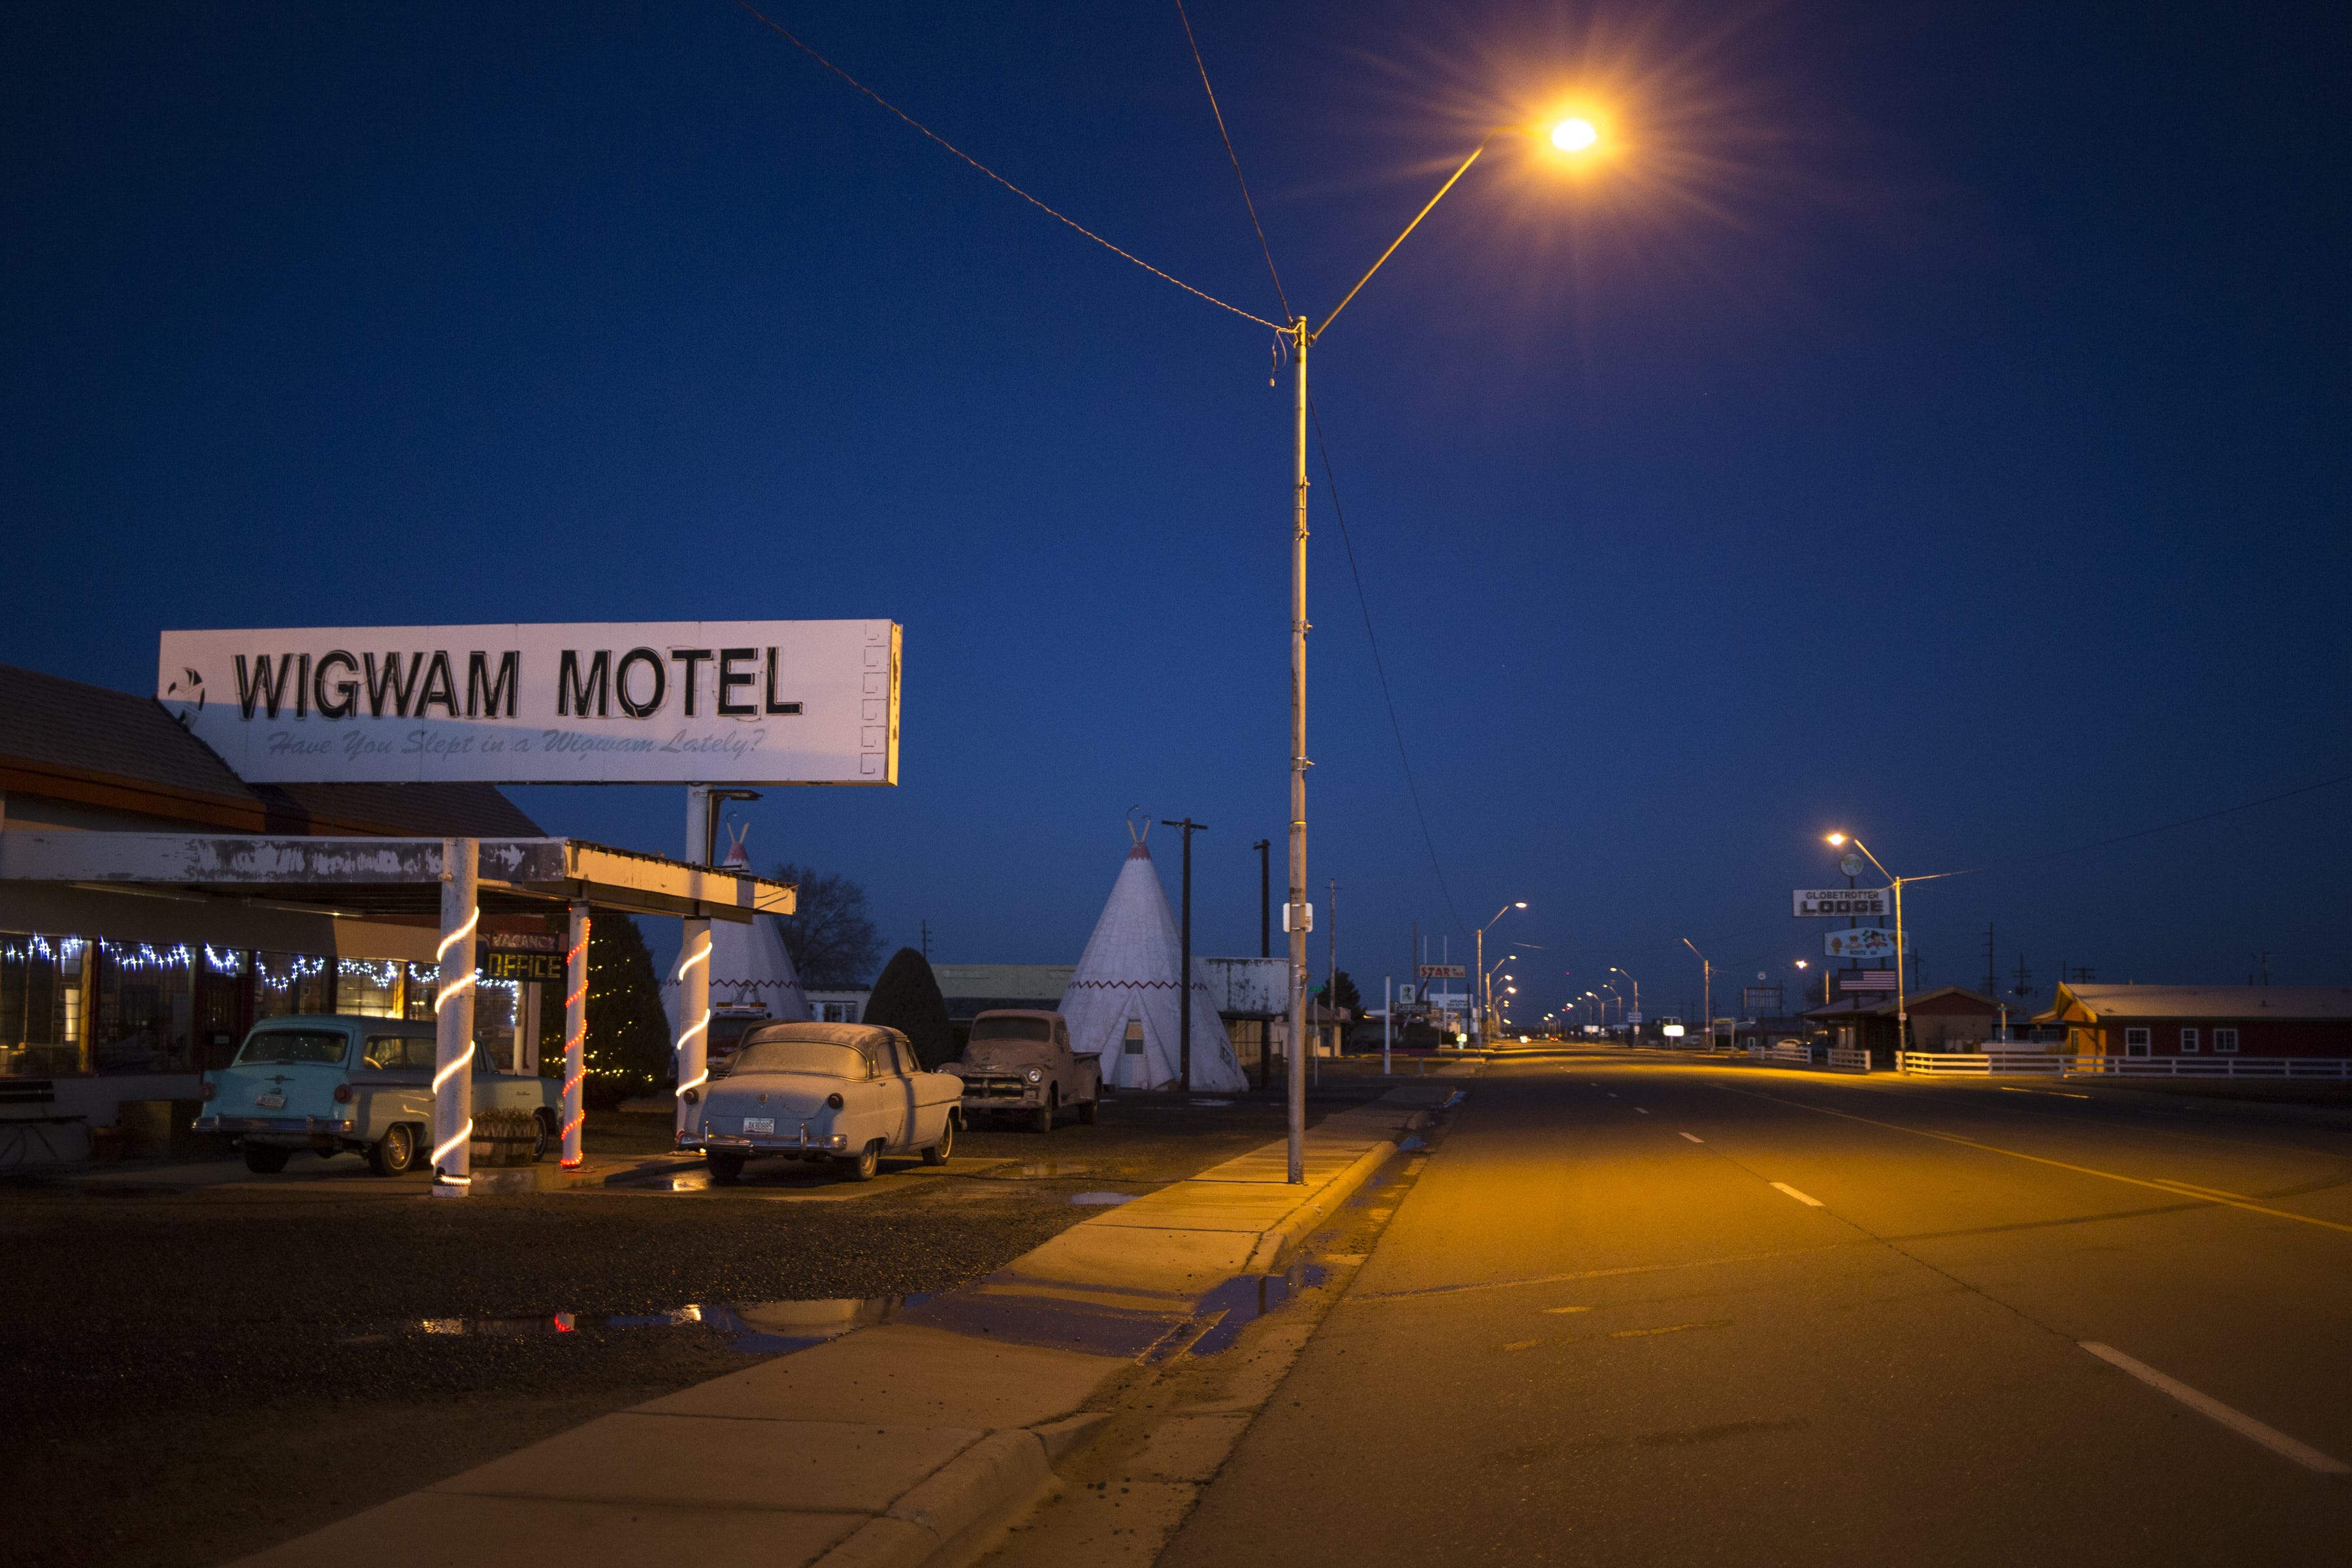 Wigwam Motel Family keeps Route 66 picture